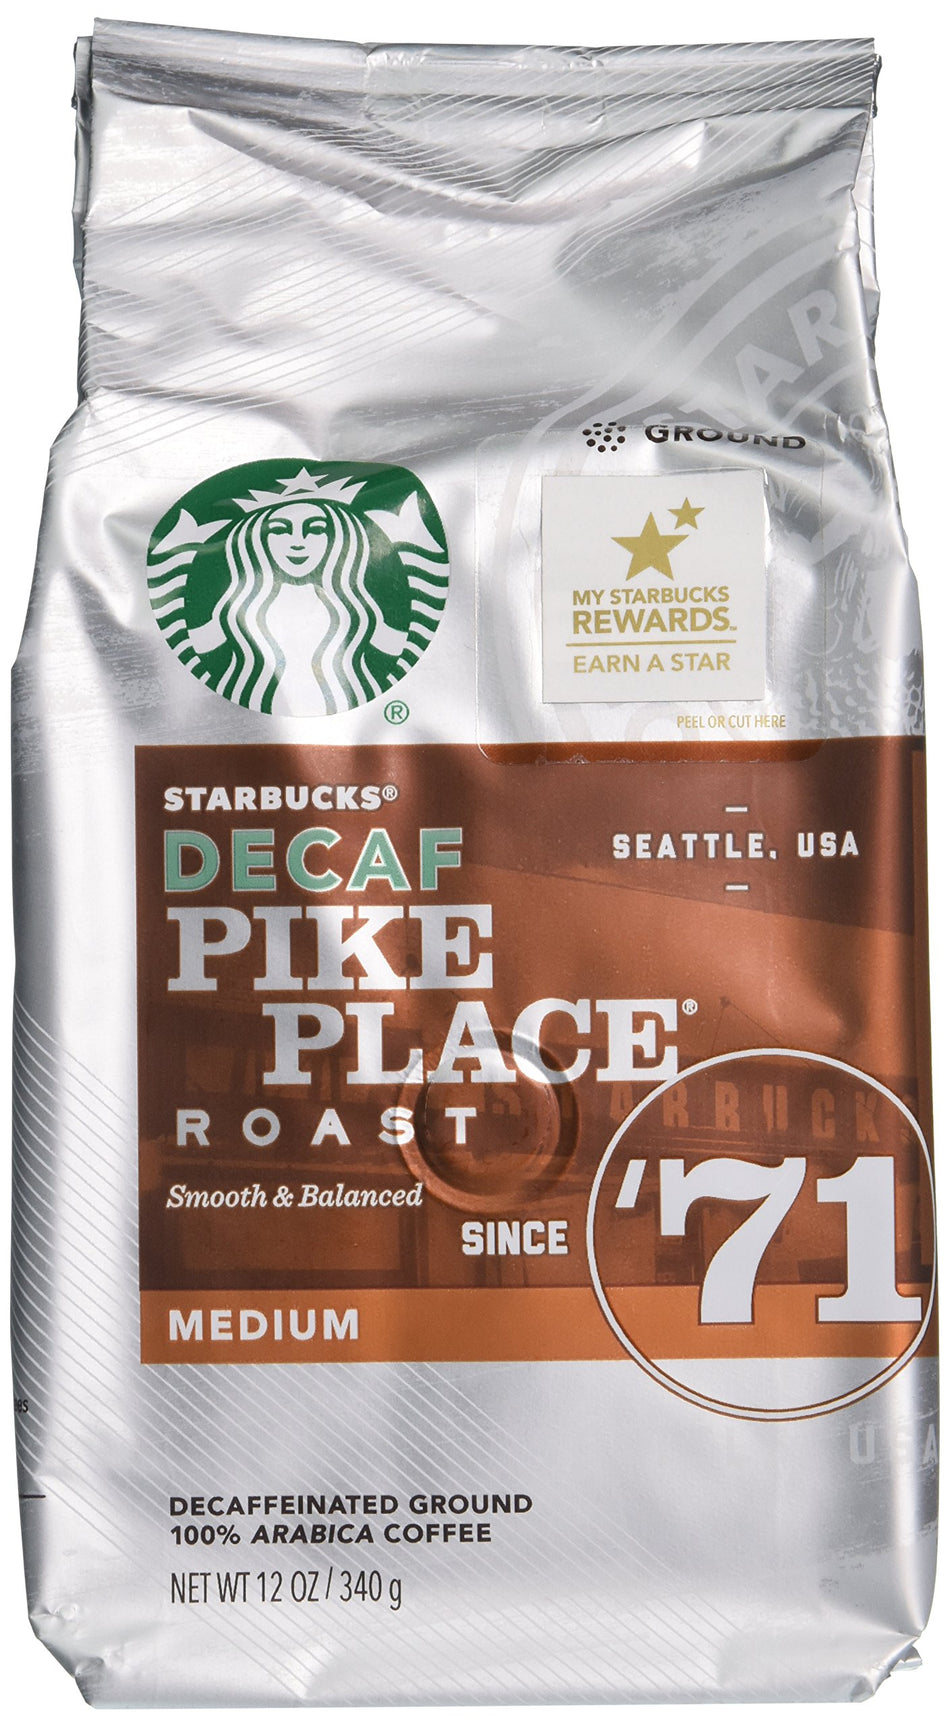 Starbucks Decaf Pike Place Roast, Ground, 12 oz. Bag (Pack of 3) (Pack of 3)